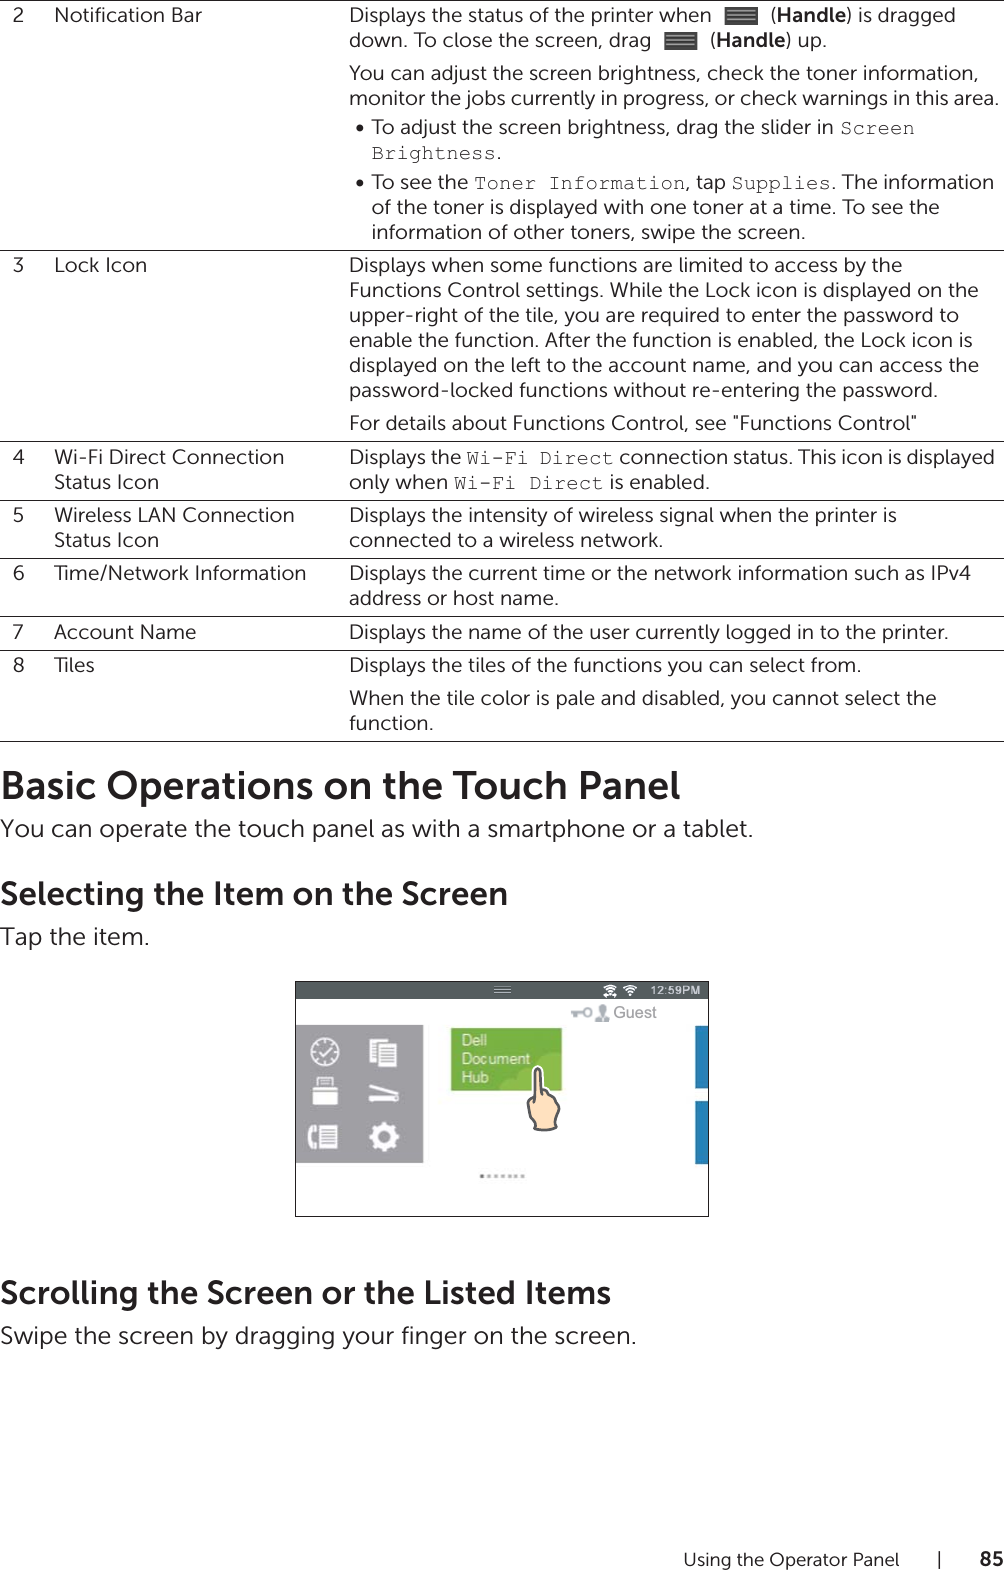 Using the Operator Panel |85Basic Operations on the Touch PanelYou can operate the touch panel as with a smartphone or a tablet.Selecting the Item on the ScreenTap the item.Scrolling the Screen or the Listed ItemsSwipe the screen by dragging your finger on the screen.2 Notification Bar Displays the status of the printer when   (Handle) is dragged down. To close the screen, drag   (Handle) up.You can adjust the screen brightness, check the toner information, monitor the jobs currently in progress, or check warnings in this area.•To adjust the screen brightness, drag the slider in Screen Brightness.•To see the Toner Information, tap Supplies. The information of the toner is displayed with one toner at a time. To see the information of other toners, swipe the screen.3 Lock Icon Displays when some functions are limited to access by the  Functions Control settings. While the Lock icon is displayed on the upper-right of the tile, you are required to enter the password to enable the function. After the function is enabled, the Lock icon is displayed on the left to the account name, and you can access the password-locked functions without re-entering the password.For details about Functions Control, see &quot;Functions Control&quot;4Wi-Fi Direct Connection Status IconDisplays the Wi-Fi Direct connection status. This icon is displayed only when Wi-Fi Direct is enabled.5 Wireless LAN Connection Status IconDisplays the intensity of wireless signal when the printer is connected to a wireless network.6 Time/Network Information Displays the current time or the network information such as IPv4 address or host name.7 Account Name Displays the name of the user currently logged in to the printer.8 Tiles Displays the tiles of the functions you can select from.When the tile color is pale and disabled, you cannot select the function.Guest